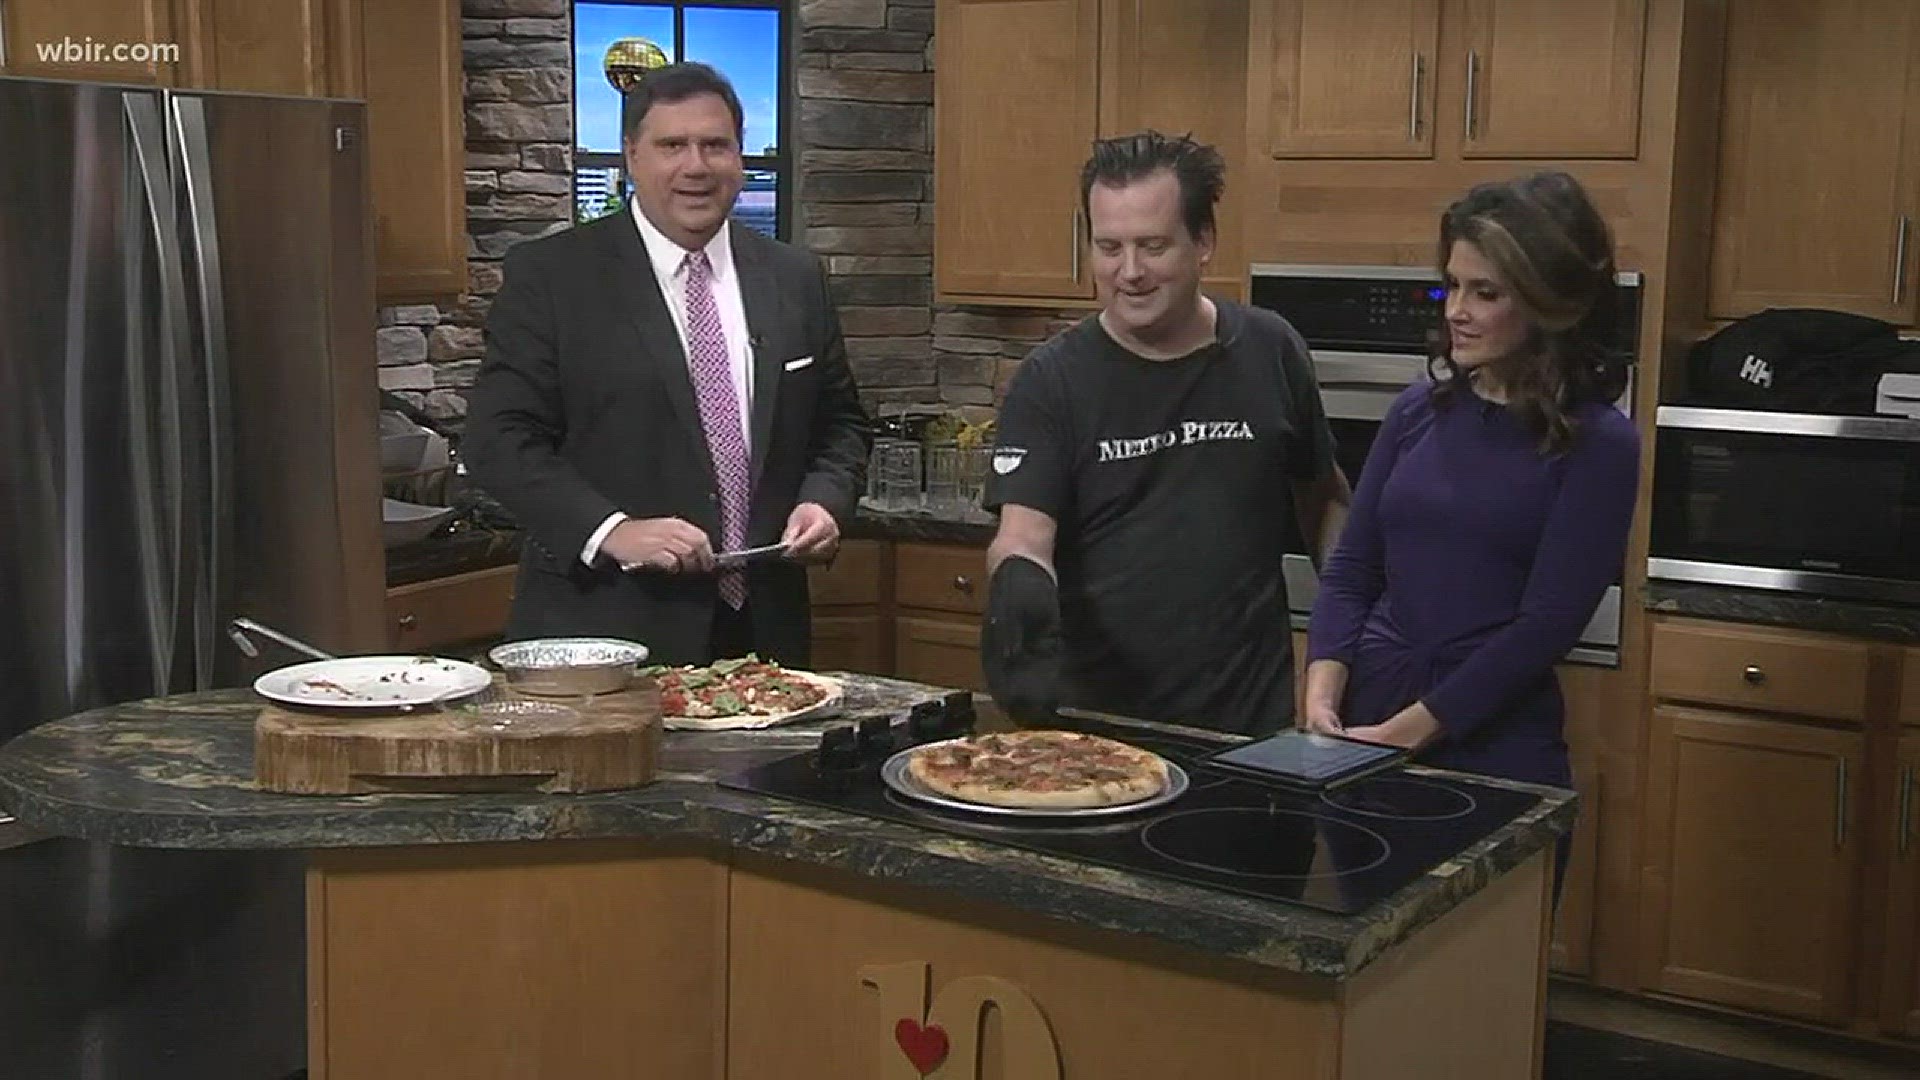 Jay with Metro Pizza (Alcoa) shares a great pizza recipe to make this weekend. For more information about Metro Pizza visit , mmmetropizza.com                                                                                    January 18, 2018-4pm